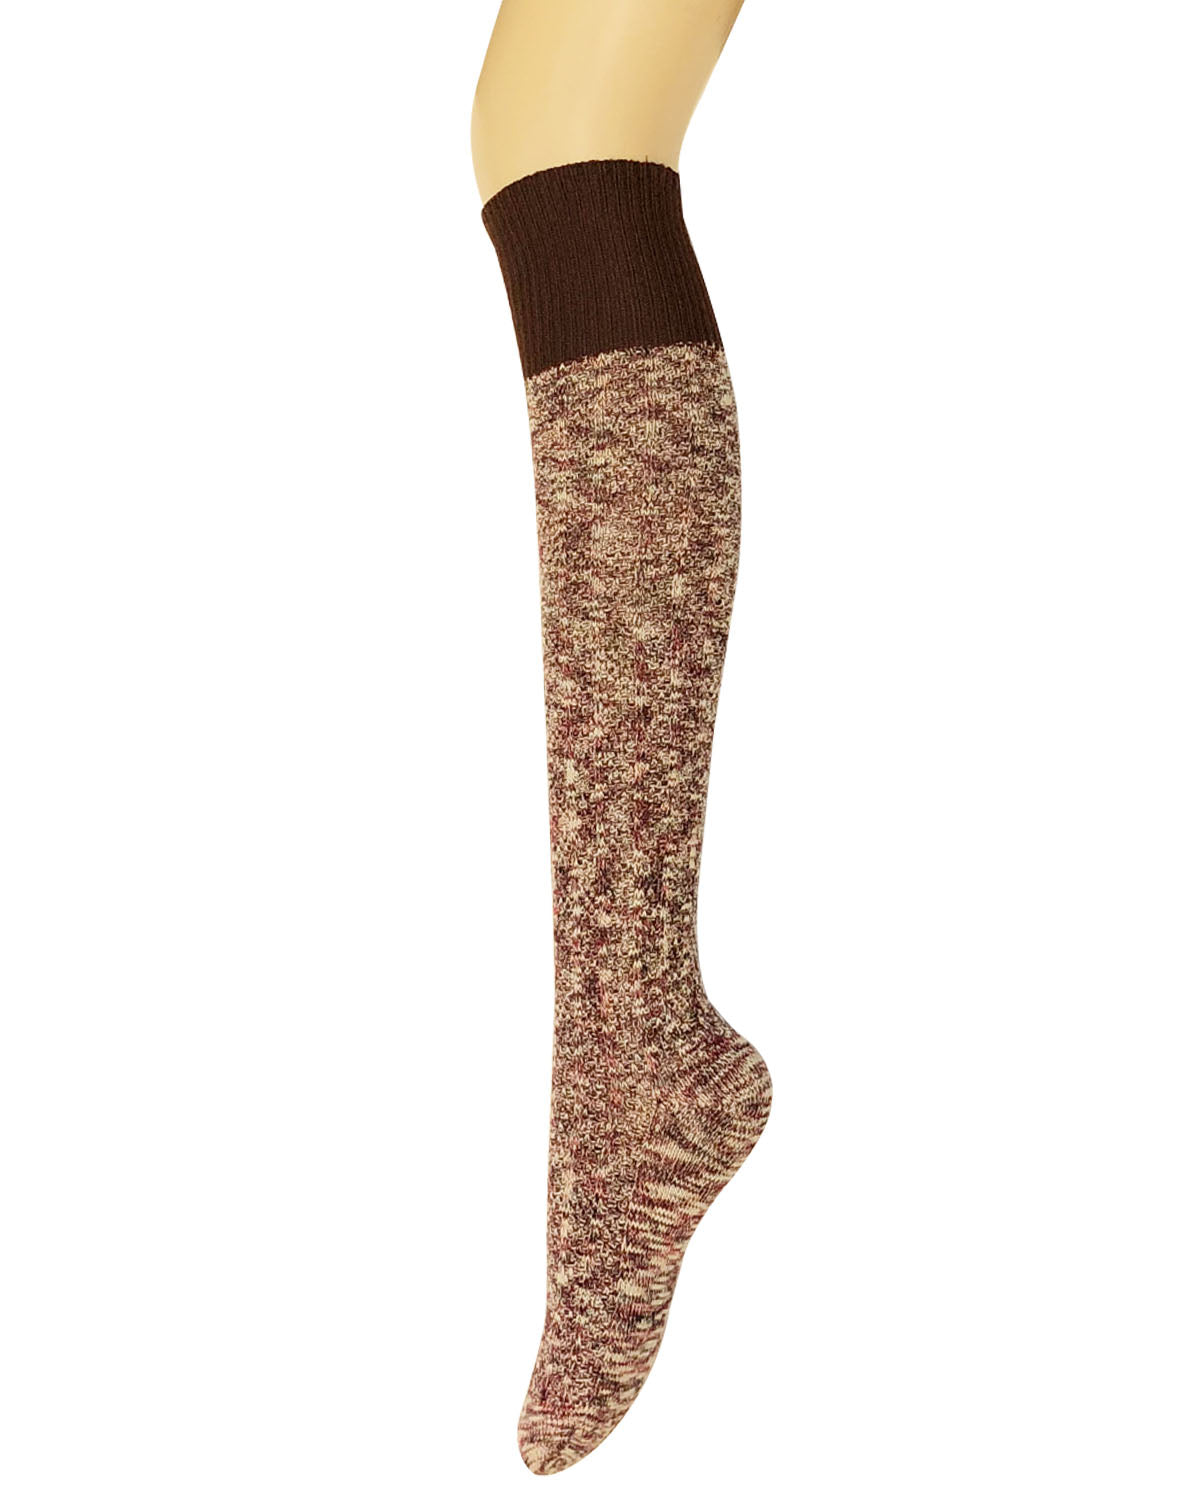 WrapablesÂ® Women's Warm Knitted Vintage Knee High Boot Socks